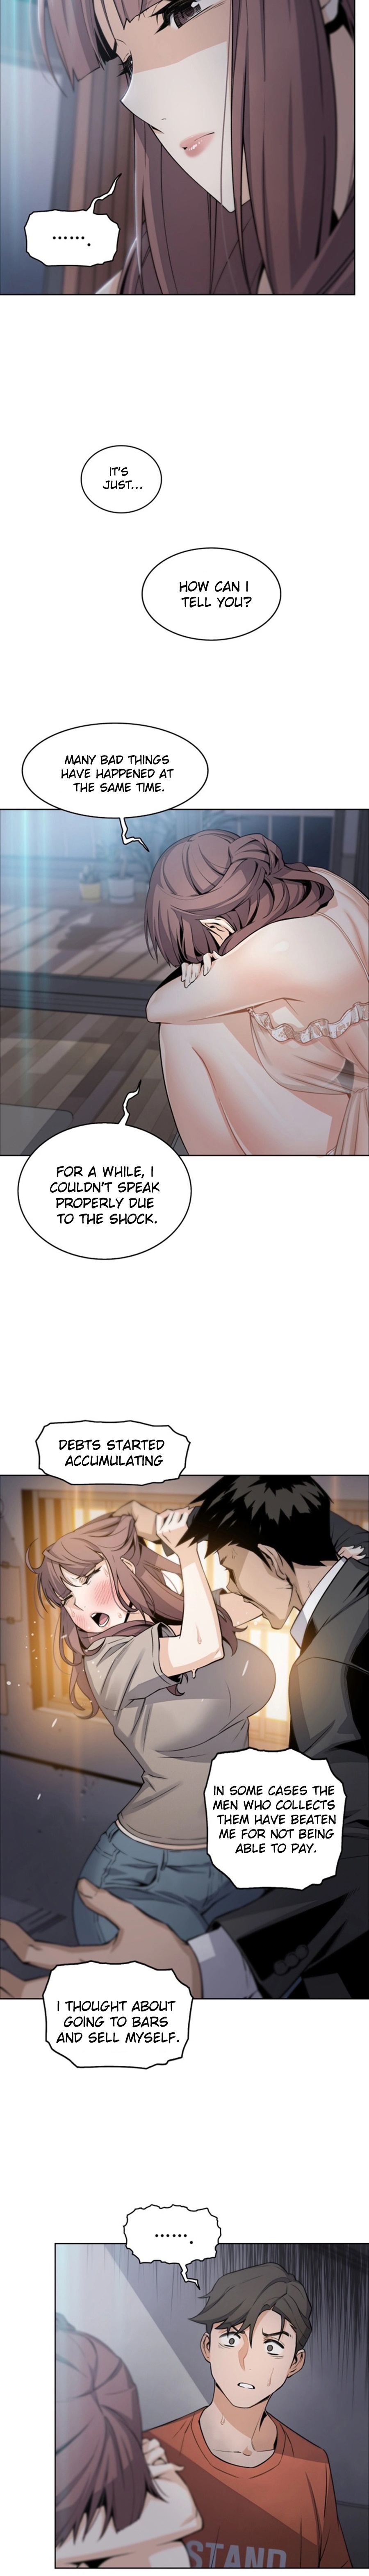 Housekeeper Manhwa - Chapter 11 Page 4